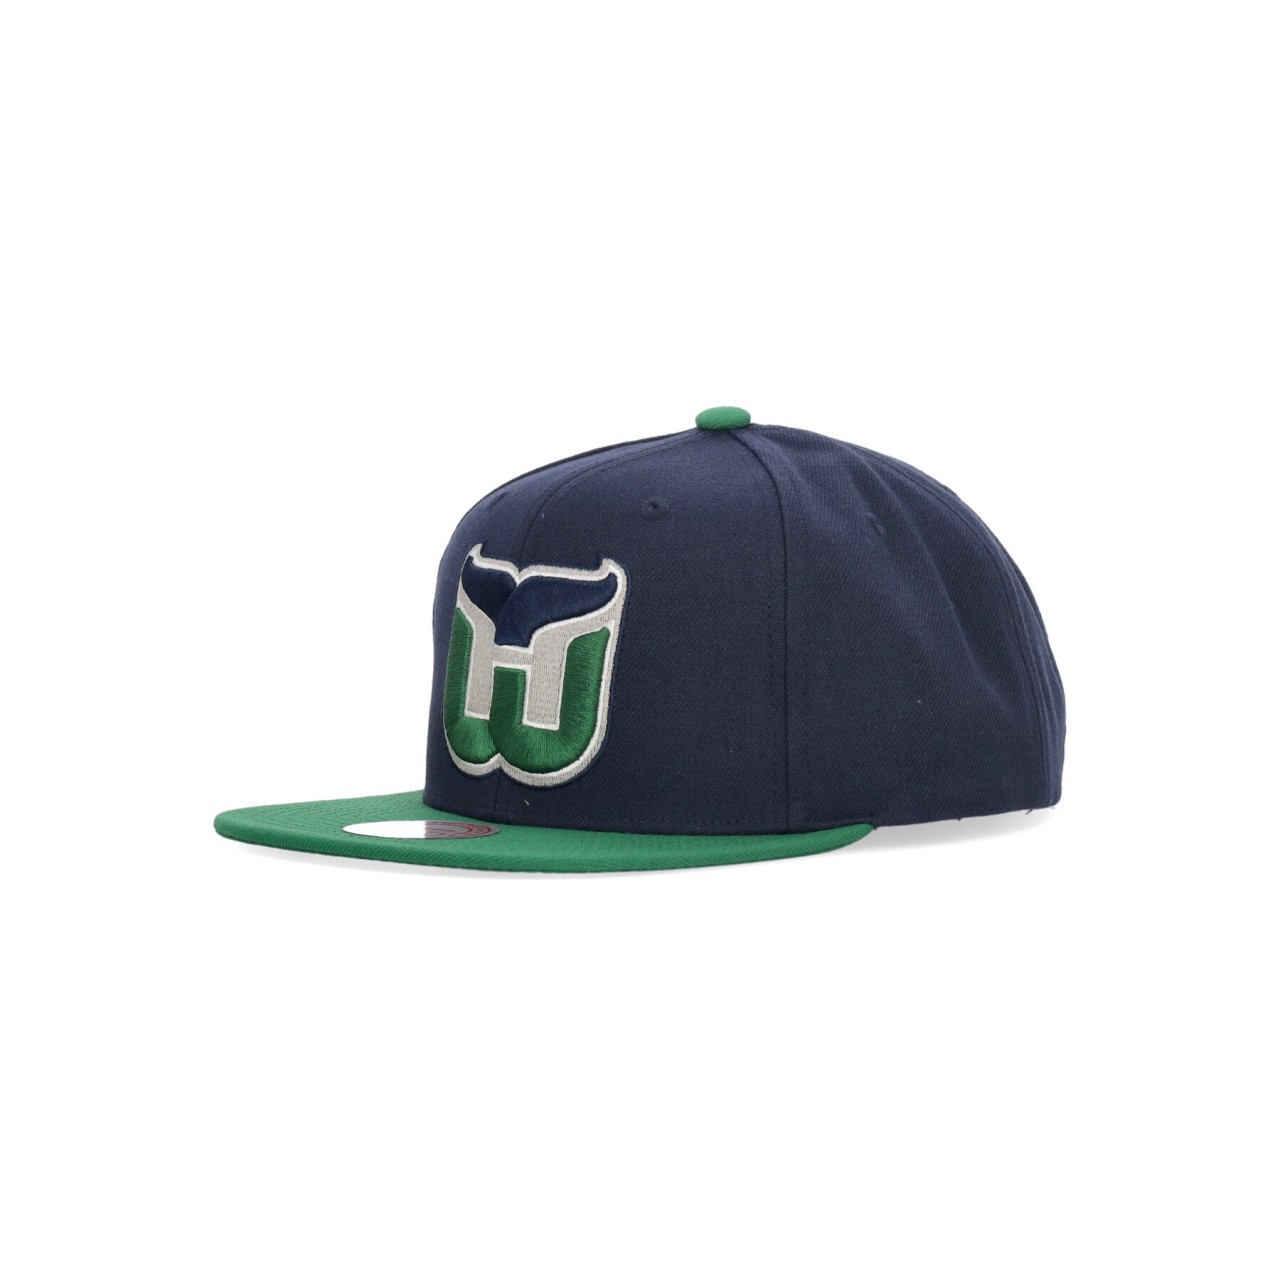 MITCHELL & NESS NHL TEAM 2 TONE 2.0 SNAPBACK HARWHA HHSS5367-HWHYYPPPBLGN